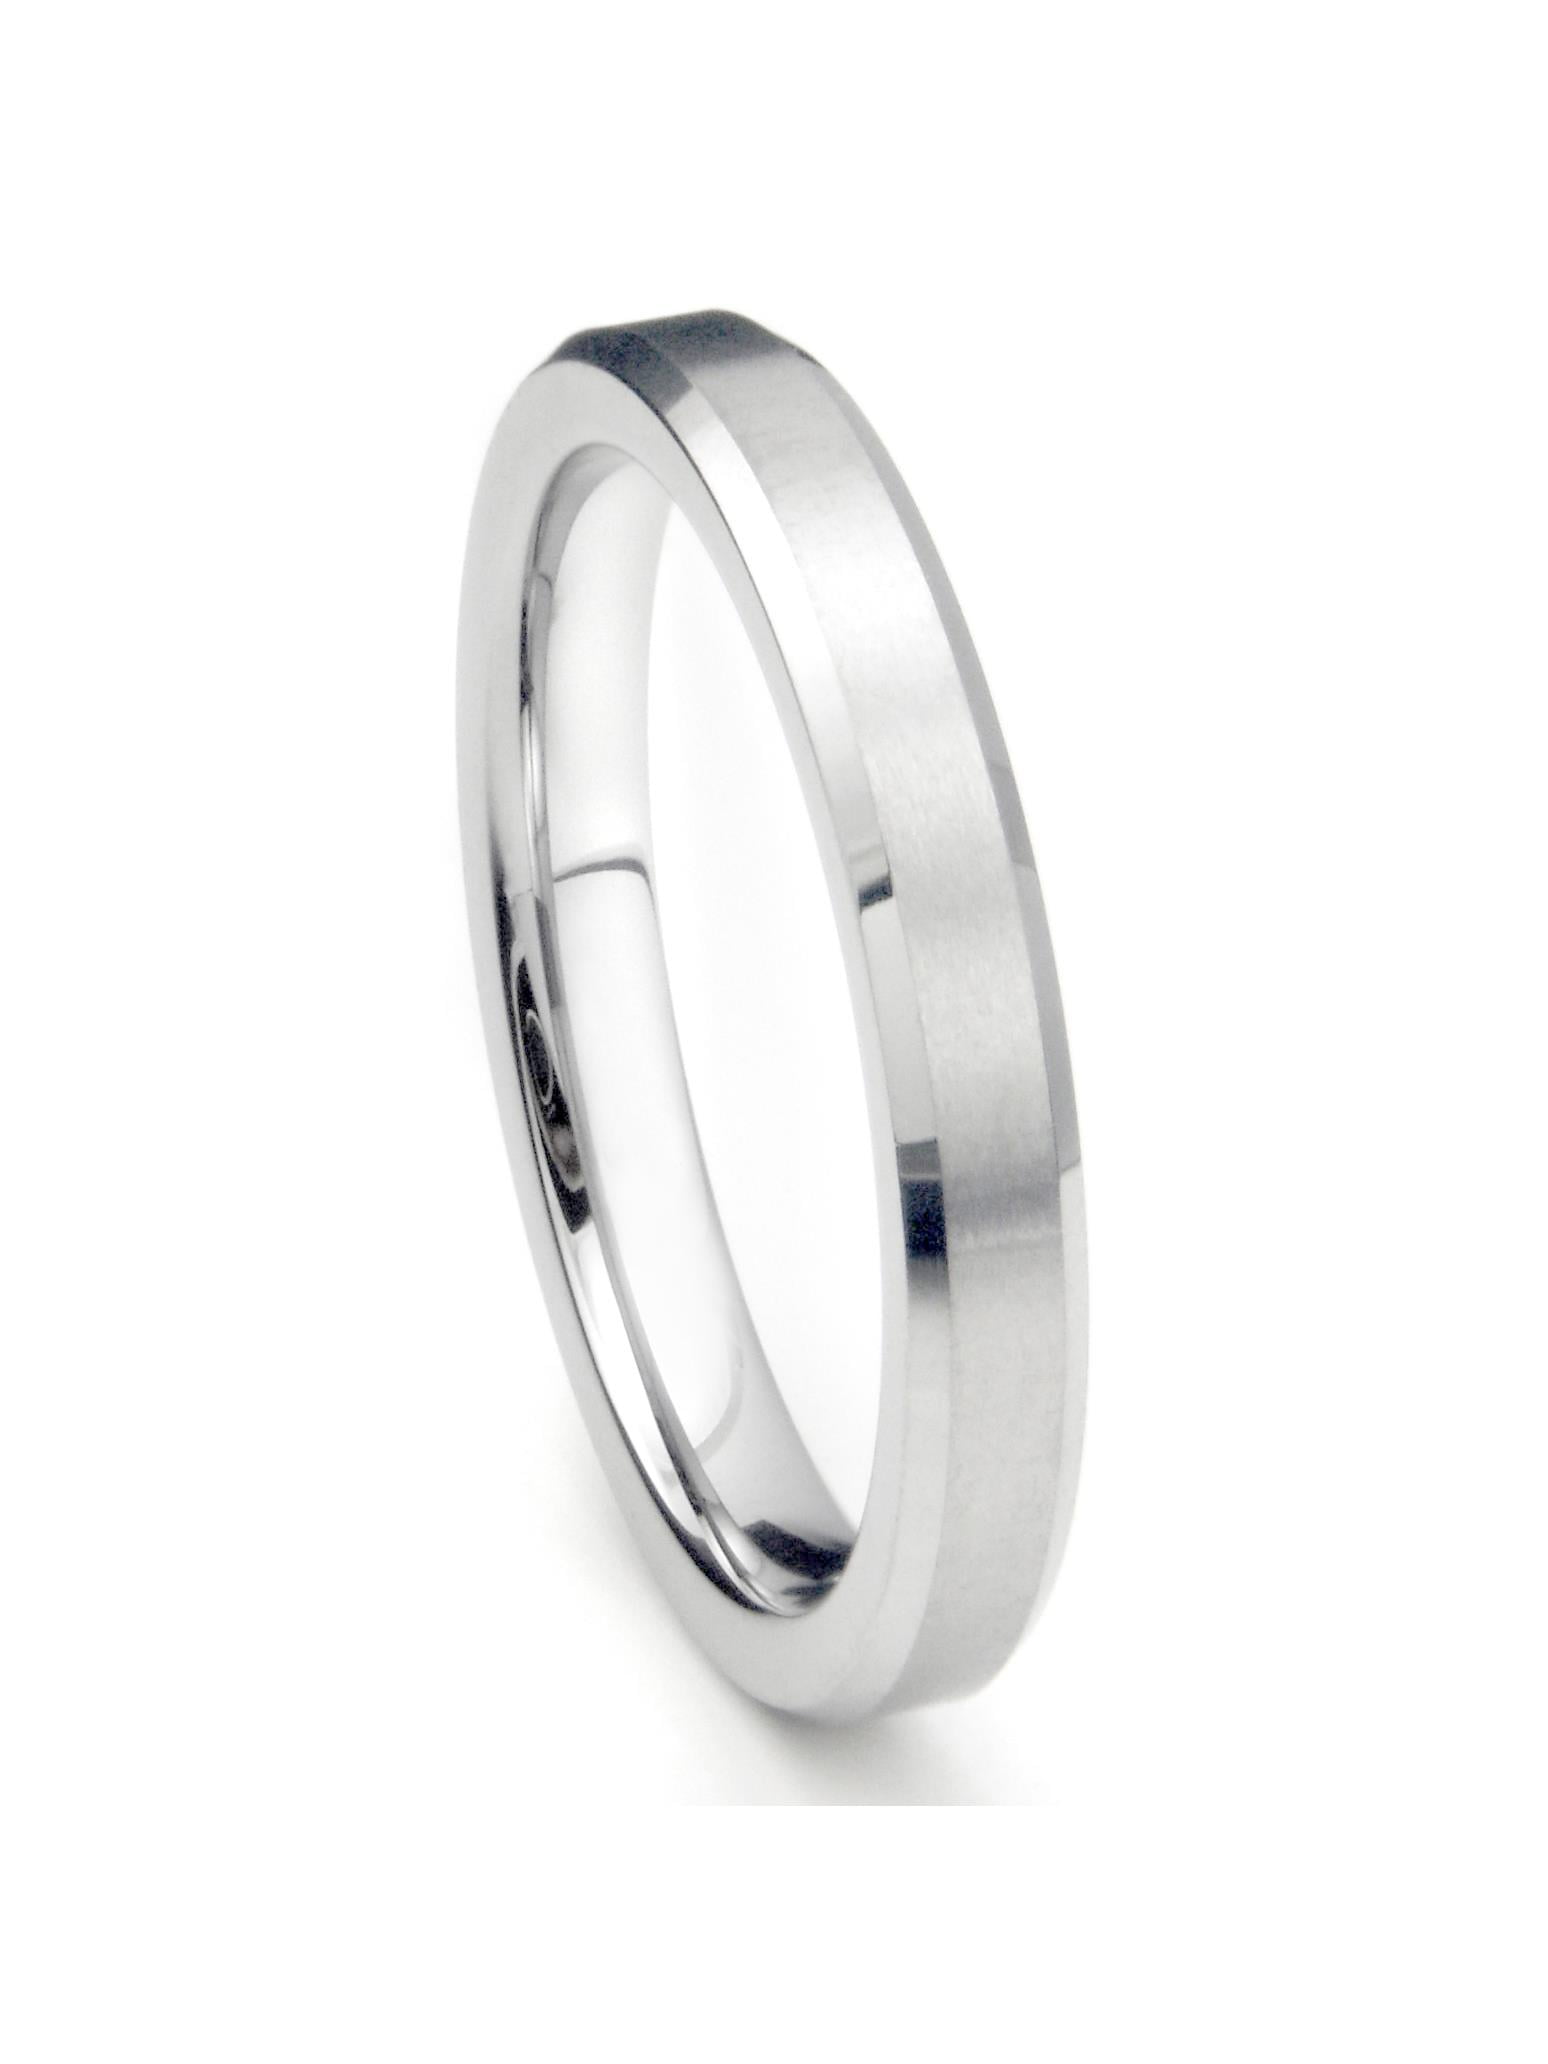 Mens Ladies Solid 925 Sterling Brush Silver Plain Wedding Band Ring Sizes  5-13